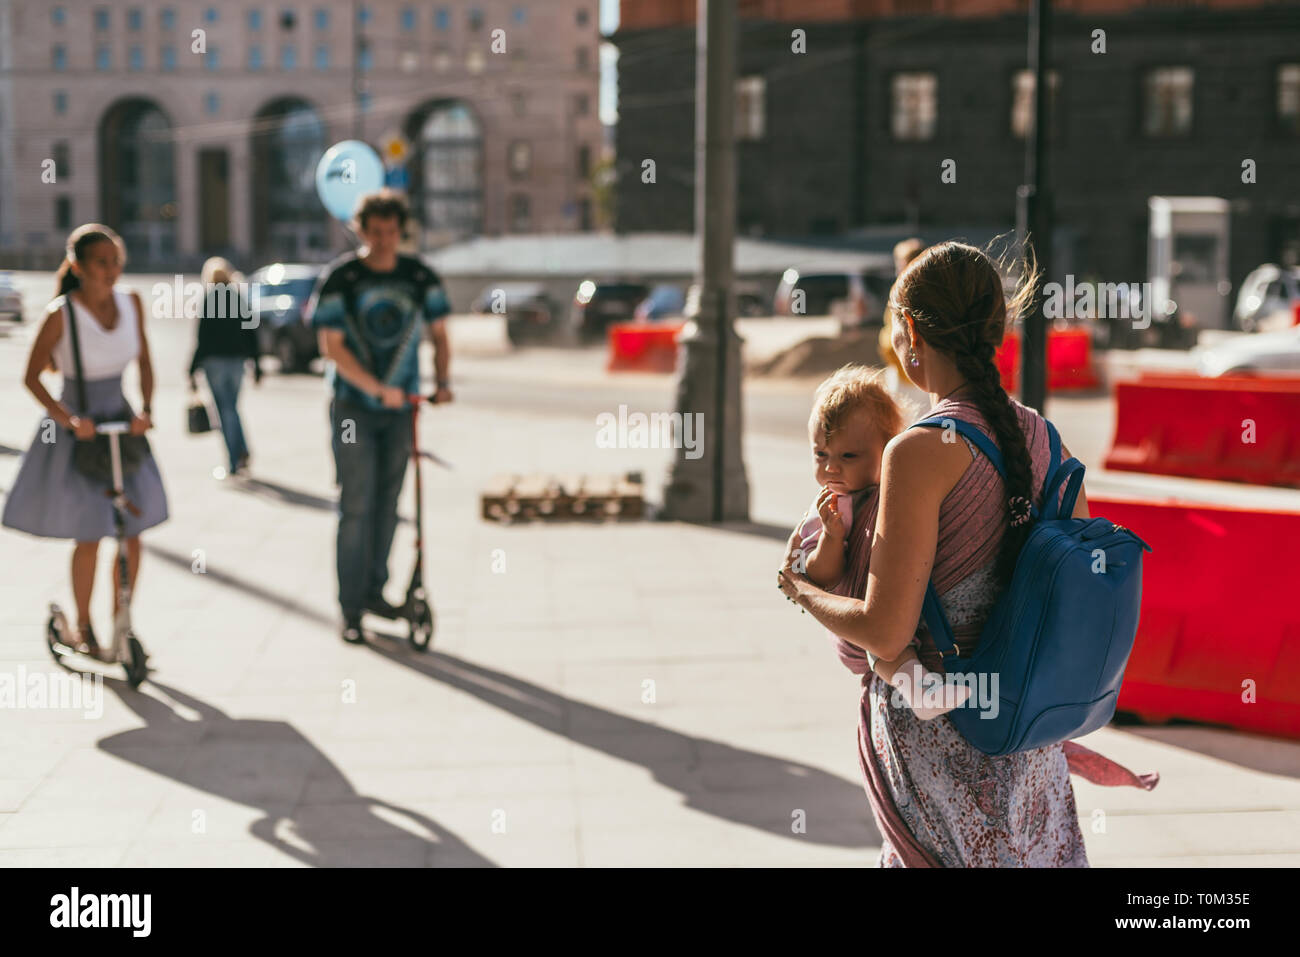 MOSCOW, RUSSIA - AUGUST 14, 2015. Young mother with a baby in a sling in the front and a backpack behind her back walking in the city. A young boy and Stock Photo